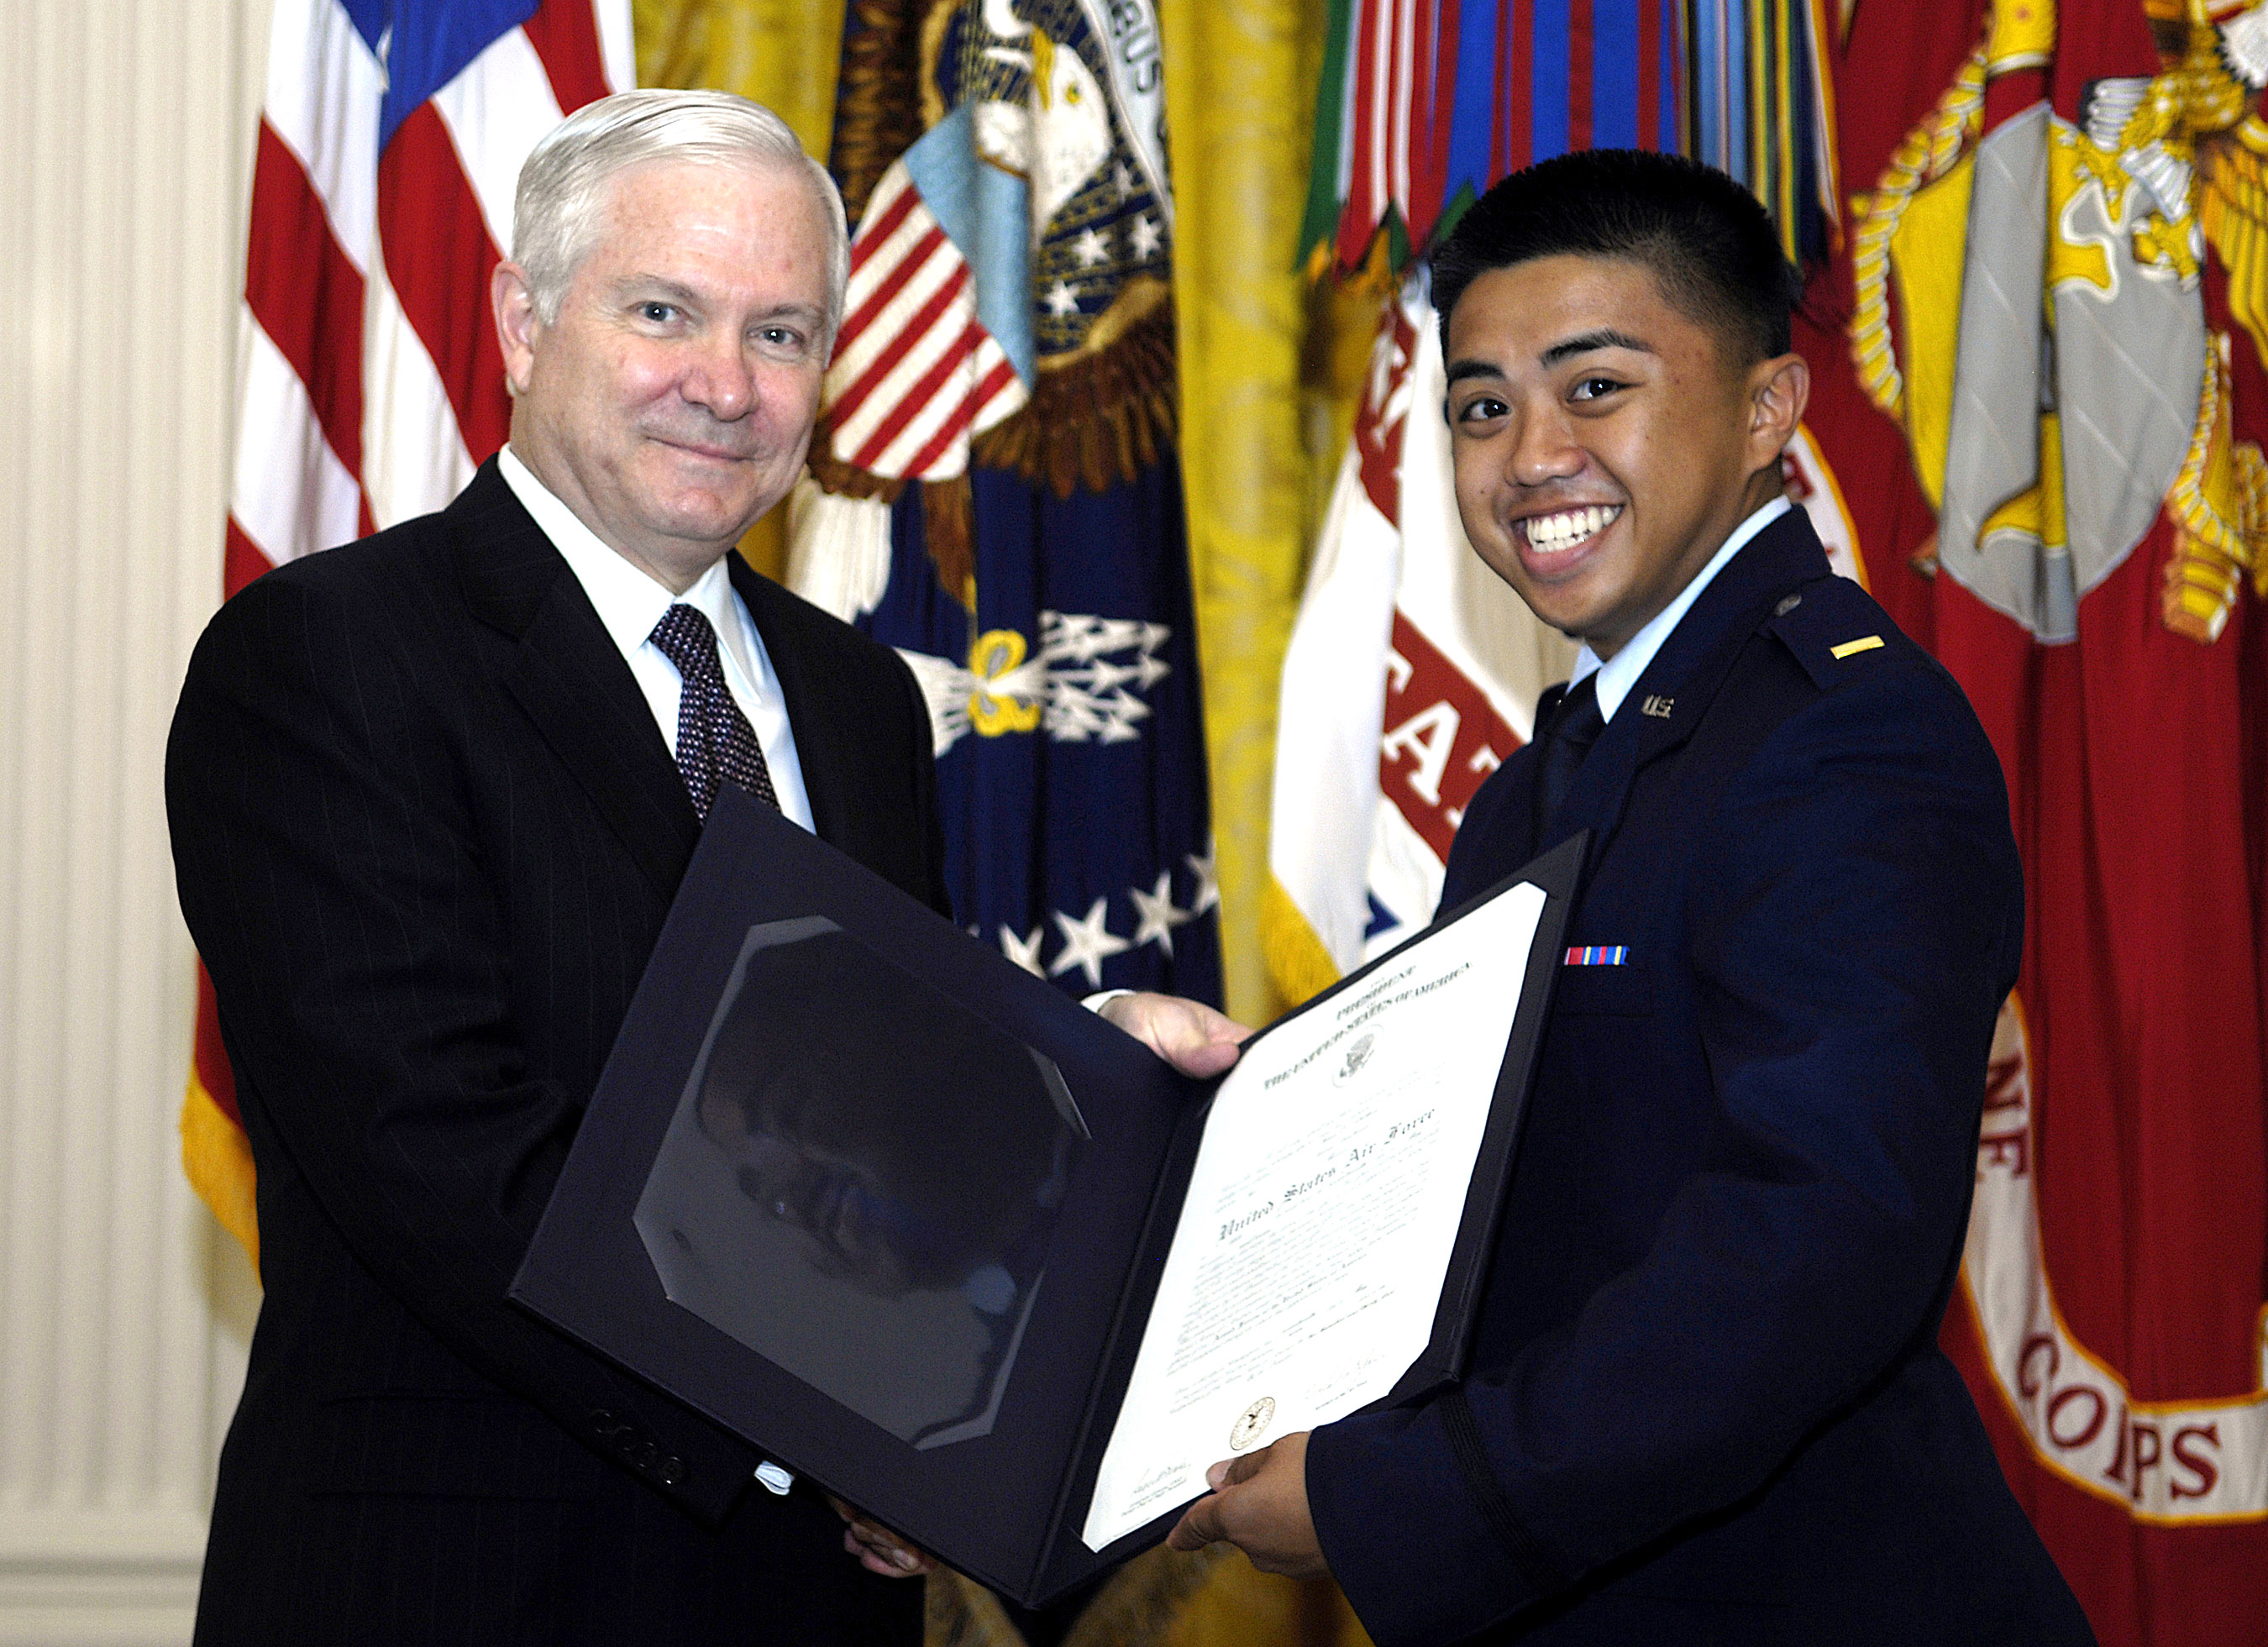 secdef-administers-1st-commissioning-oath-to-rotc-cadets-air-force